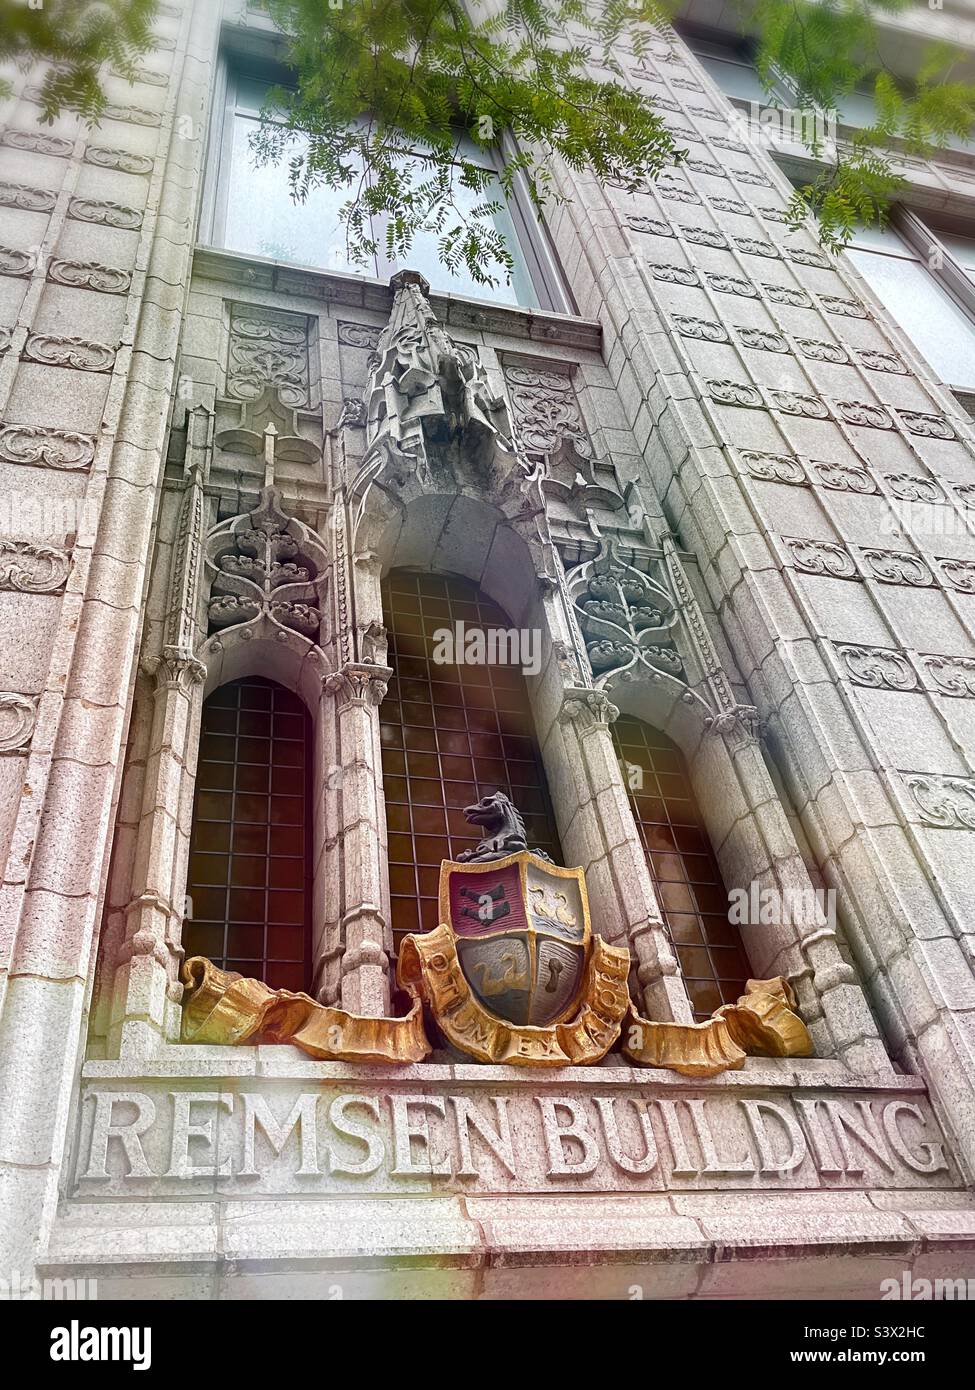 The Remsen building is in historic Neil Gothic structure at 148 Madison Ave. in the nomad section of Manhattan, 2022, New York City, USA USA Stock Photo